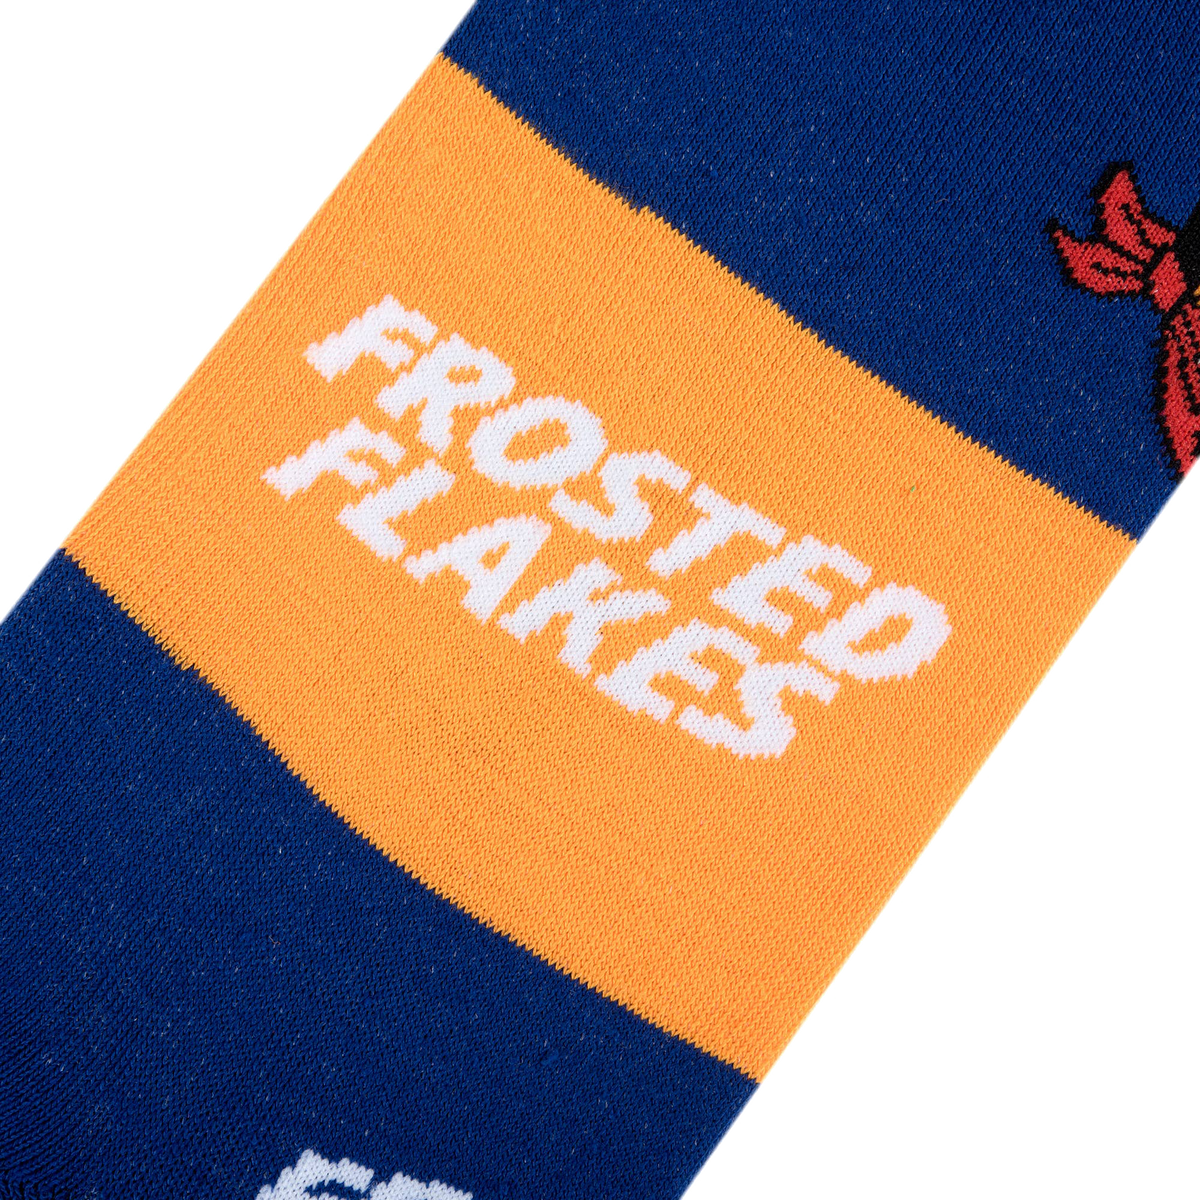 Tony The Tiger - Frosted Flakes Socks - Mens